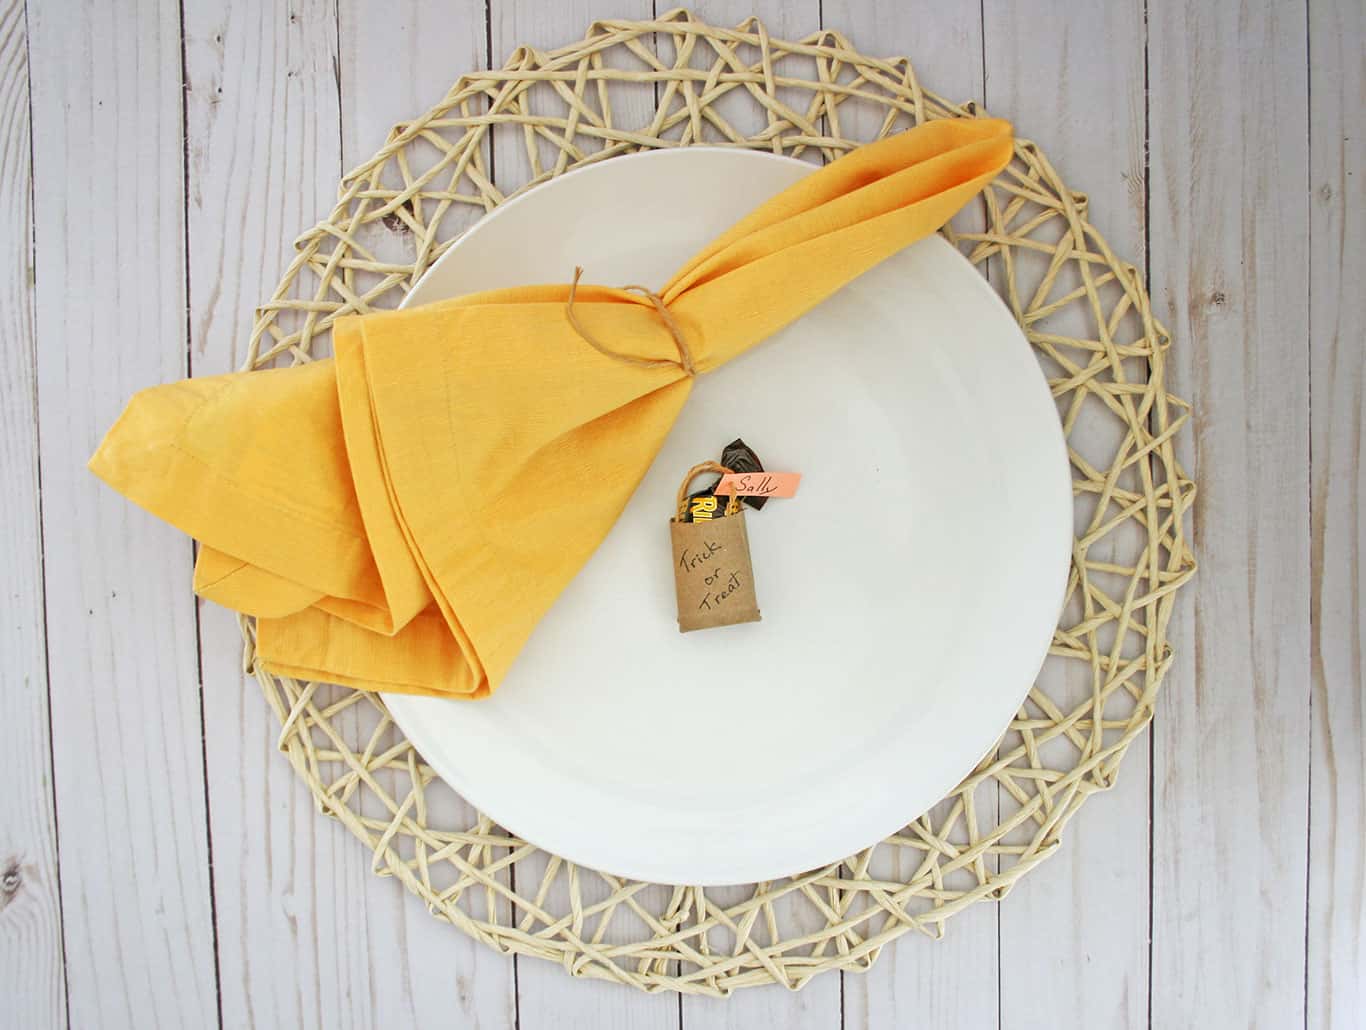 Small diy trick or treat paper bag on white plate next to yellow napkin